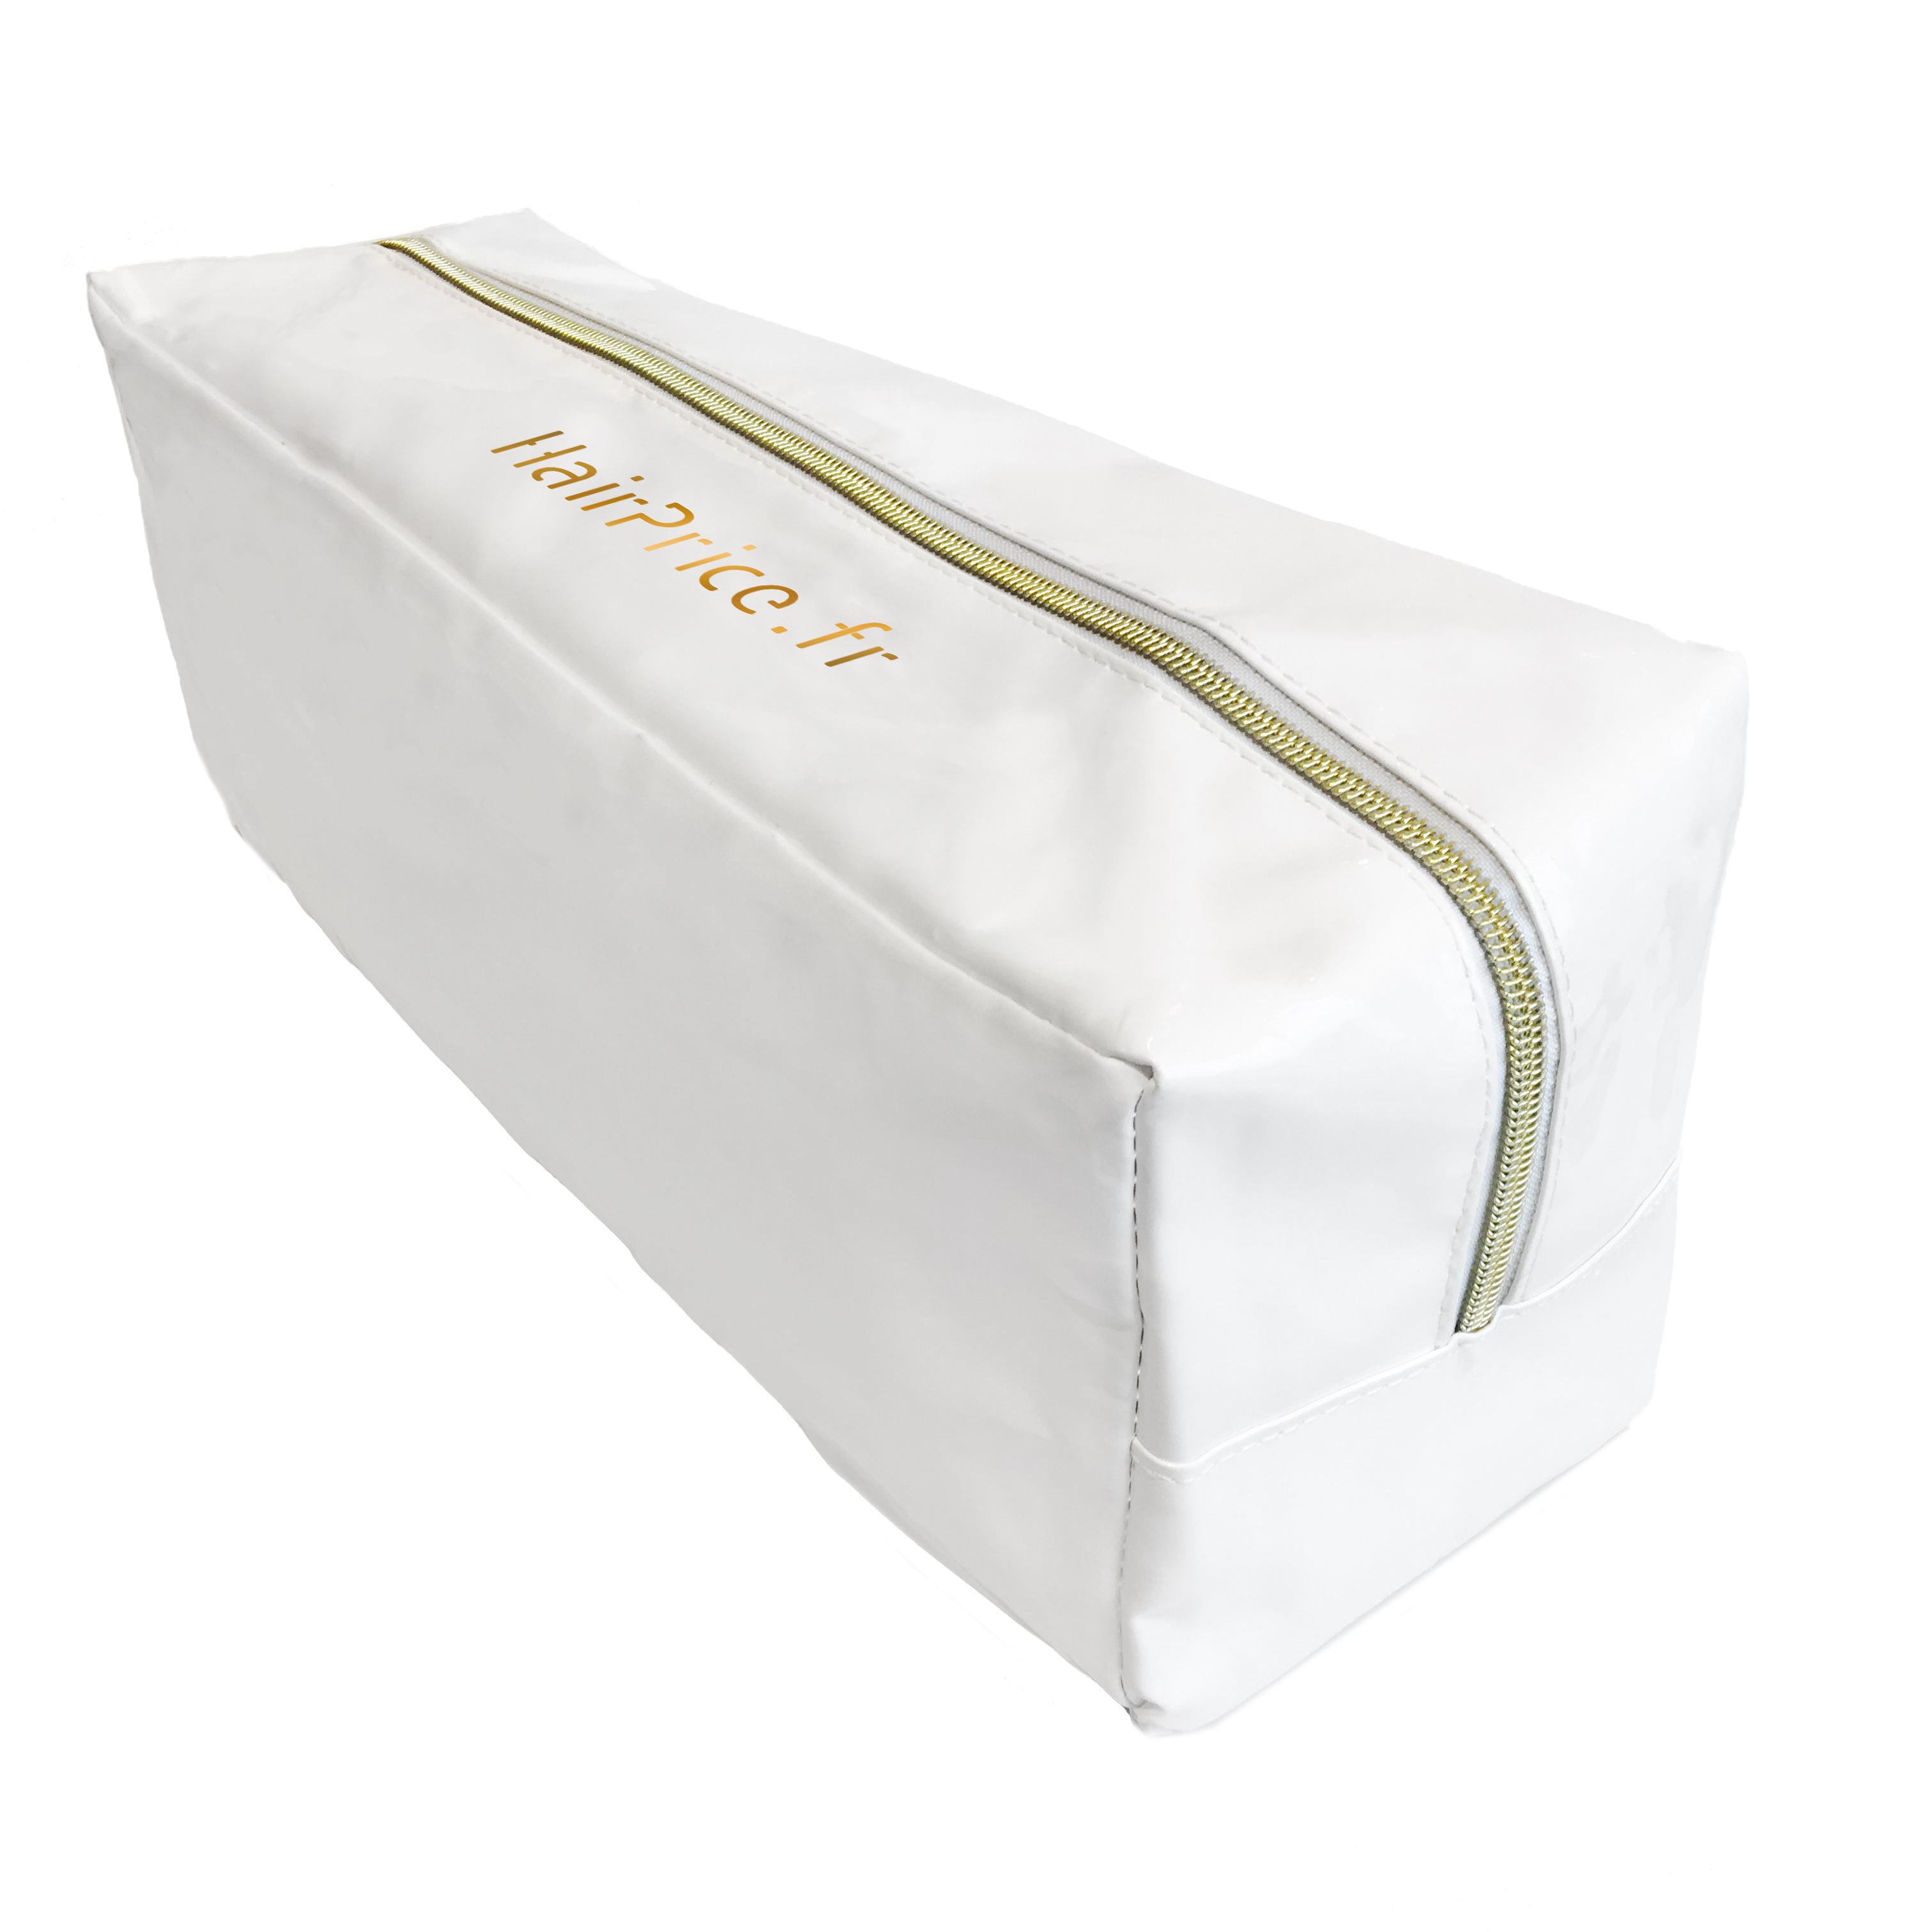 HairPrice - Trousse Glossy de transport - Steampod - Blanc et Or